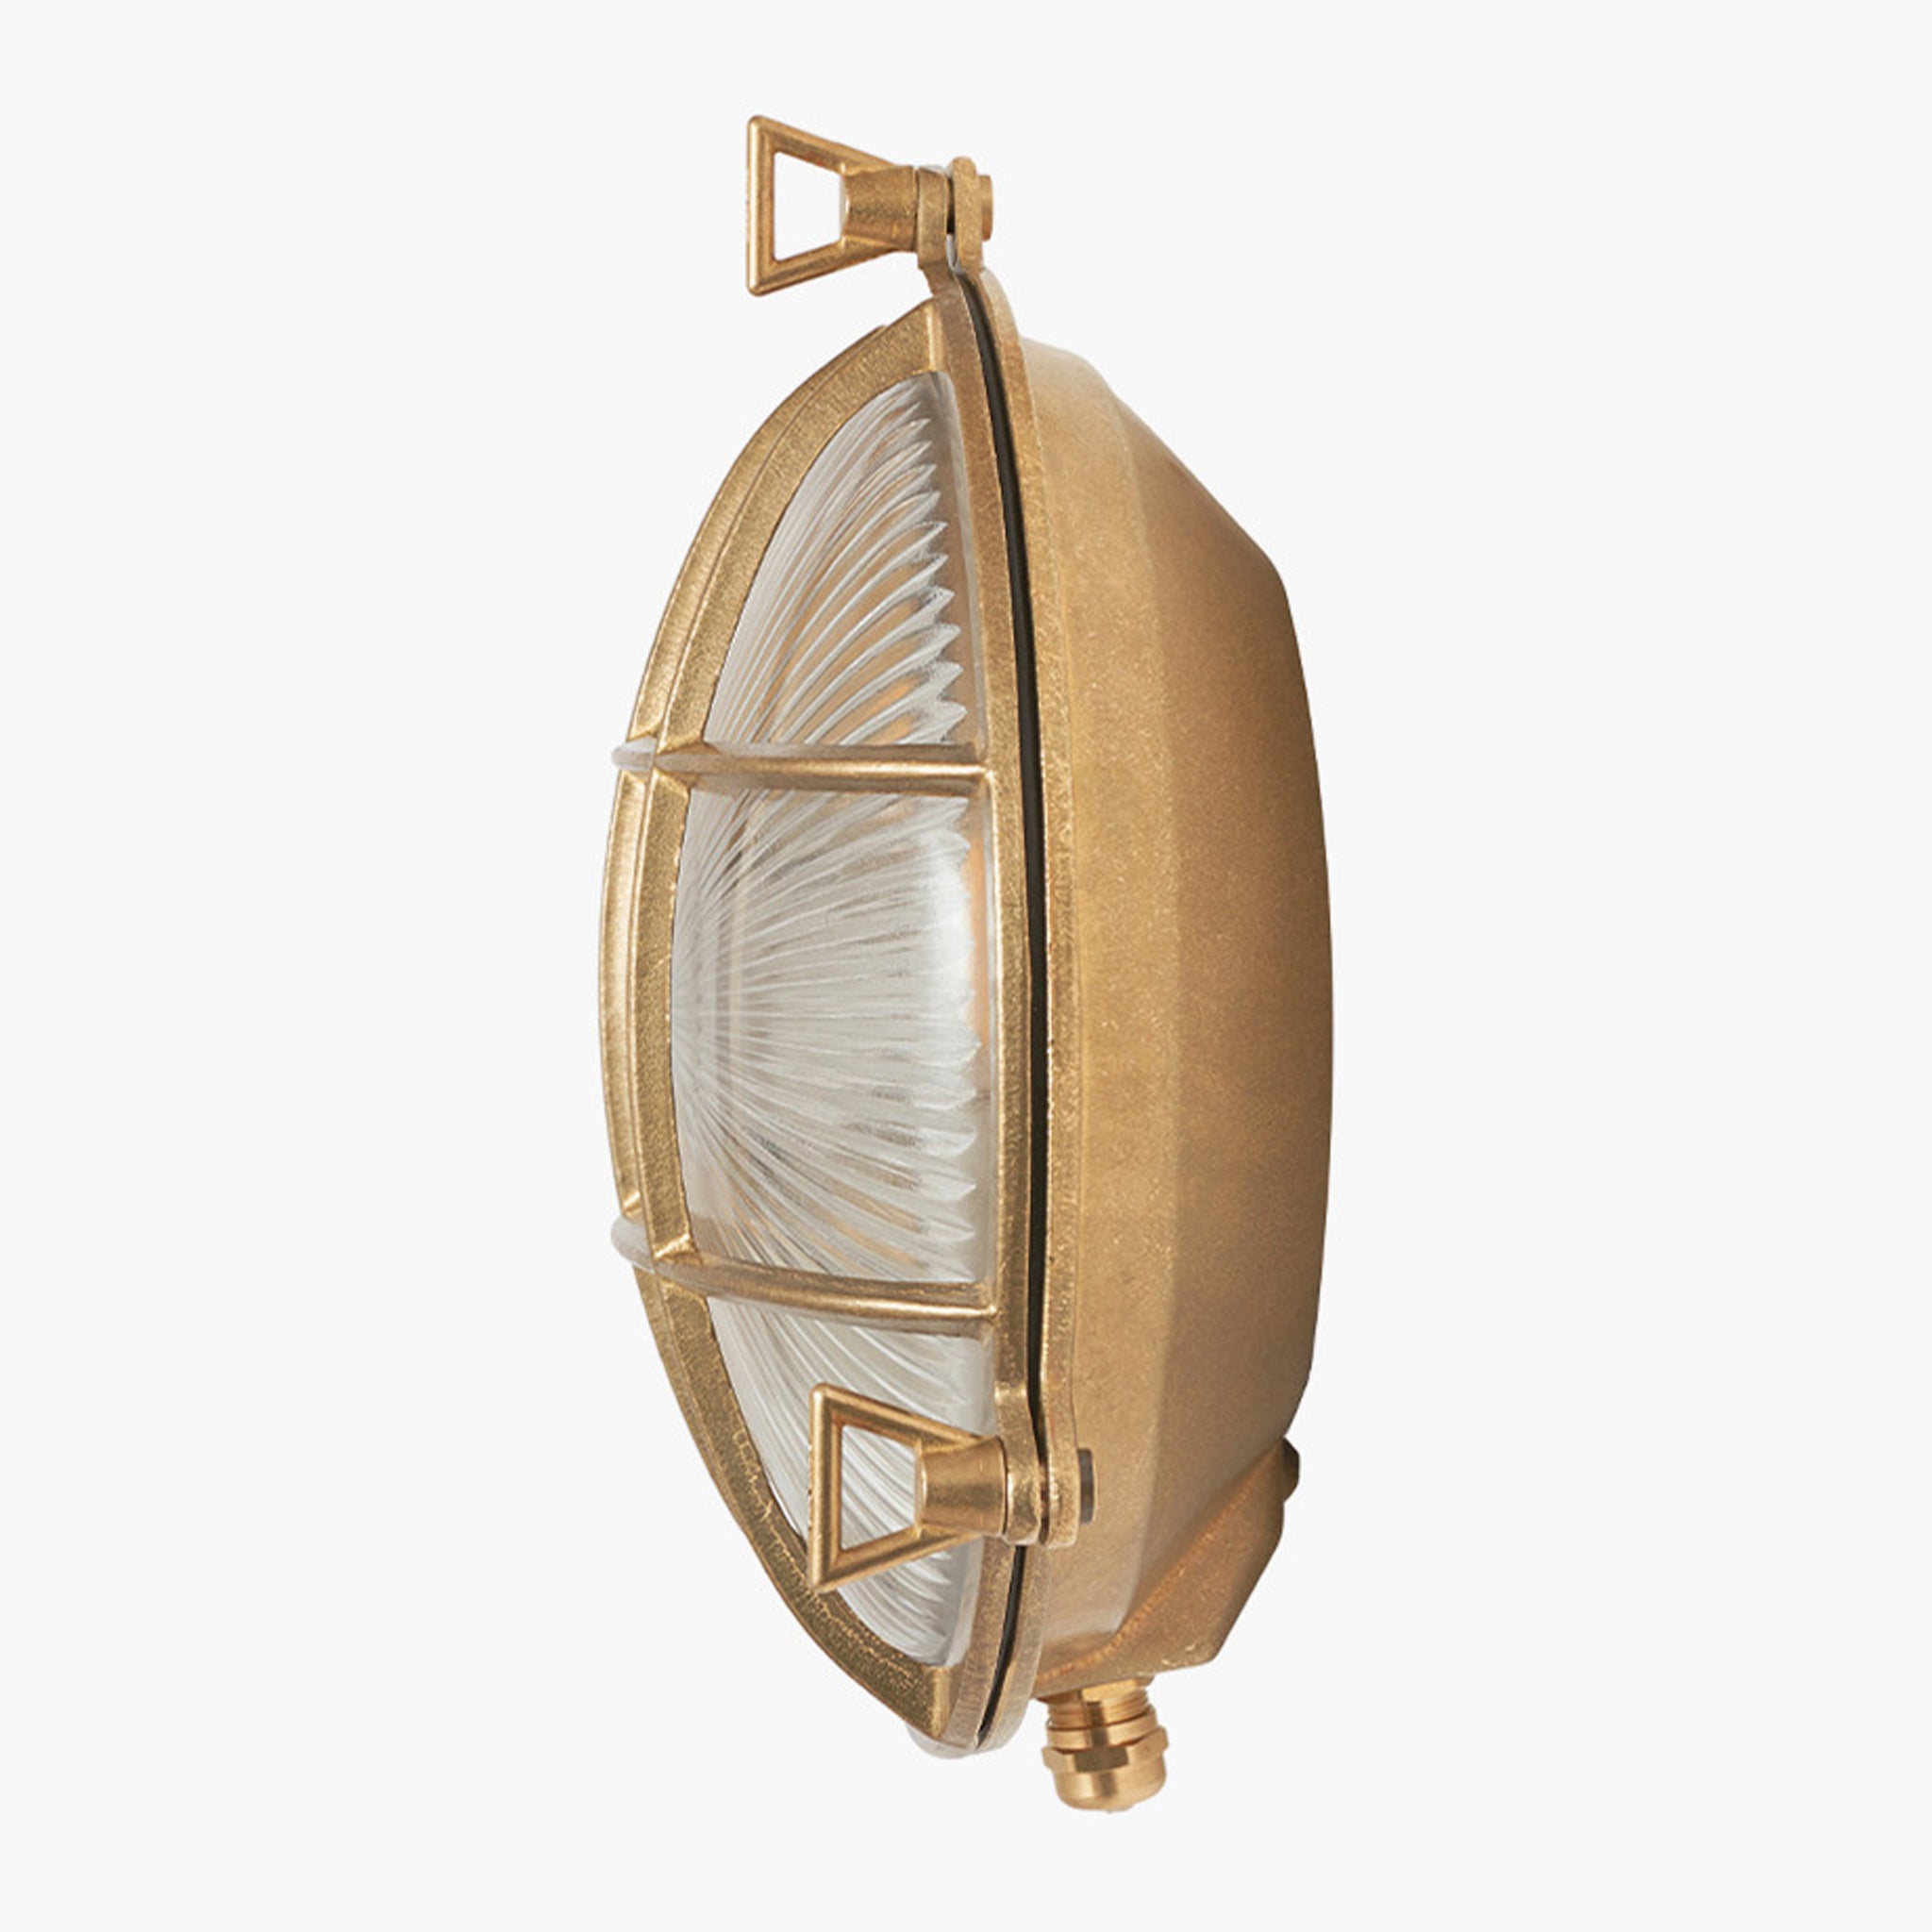 Montana Antique Brass Metal Caged Round Outdoor Wall Light